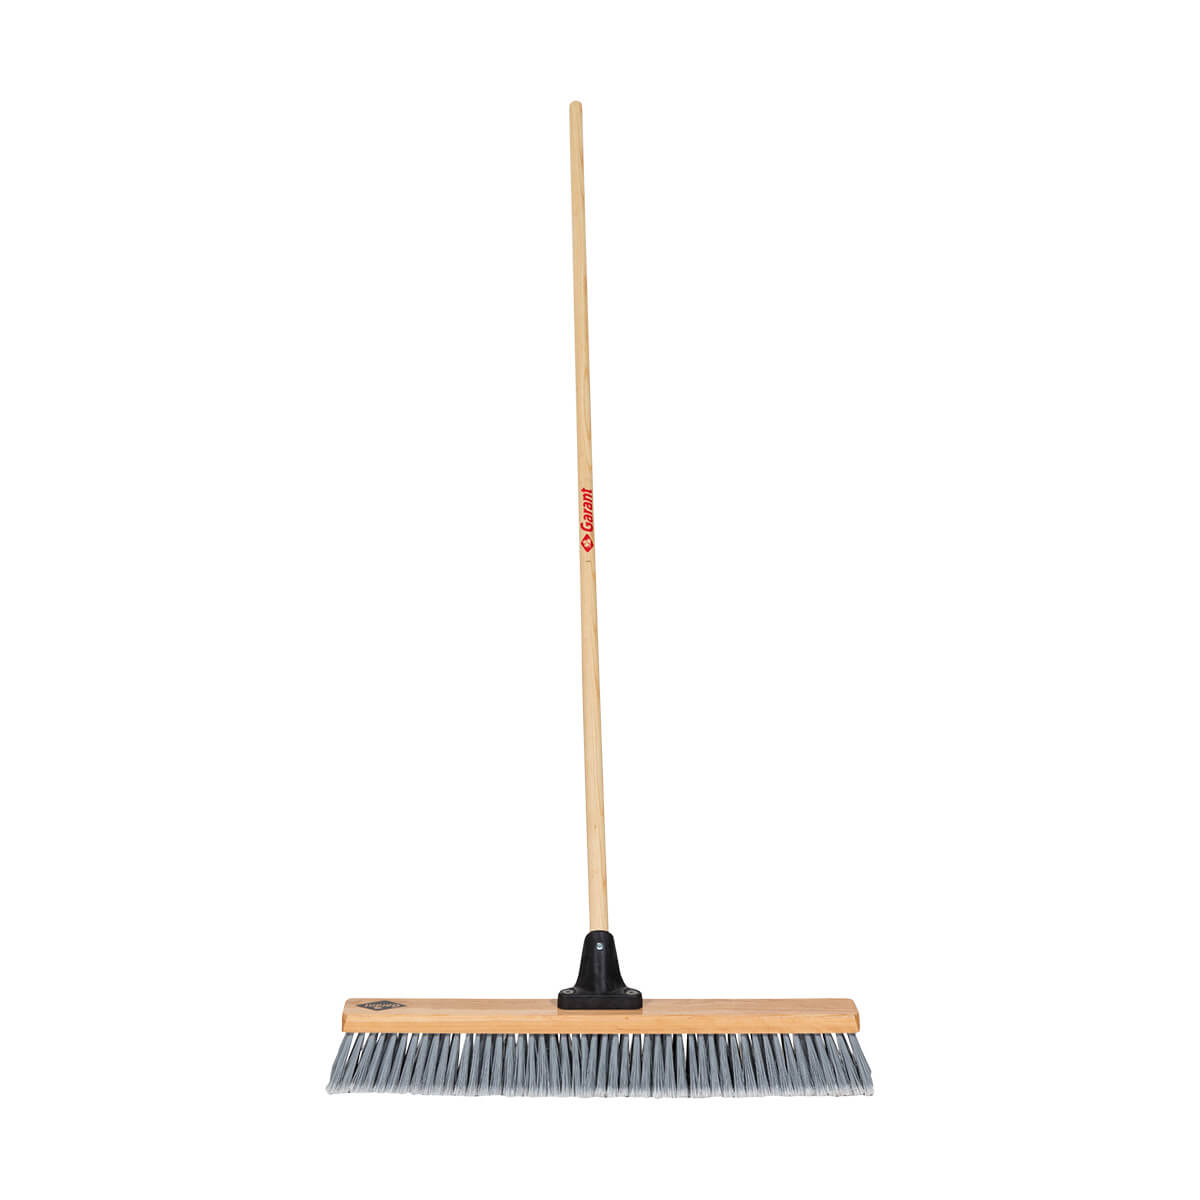 Garant Push Broom Smooth Surface - 24-in